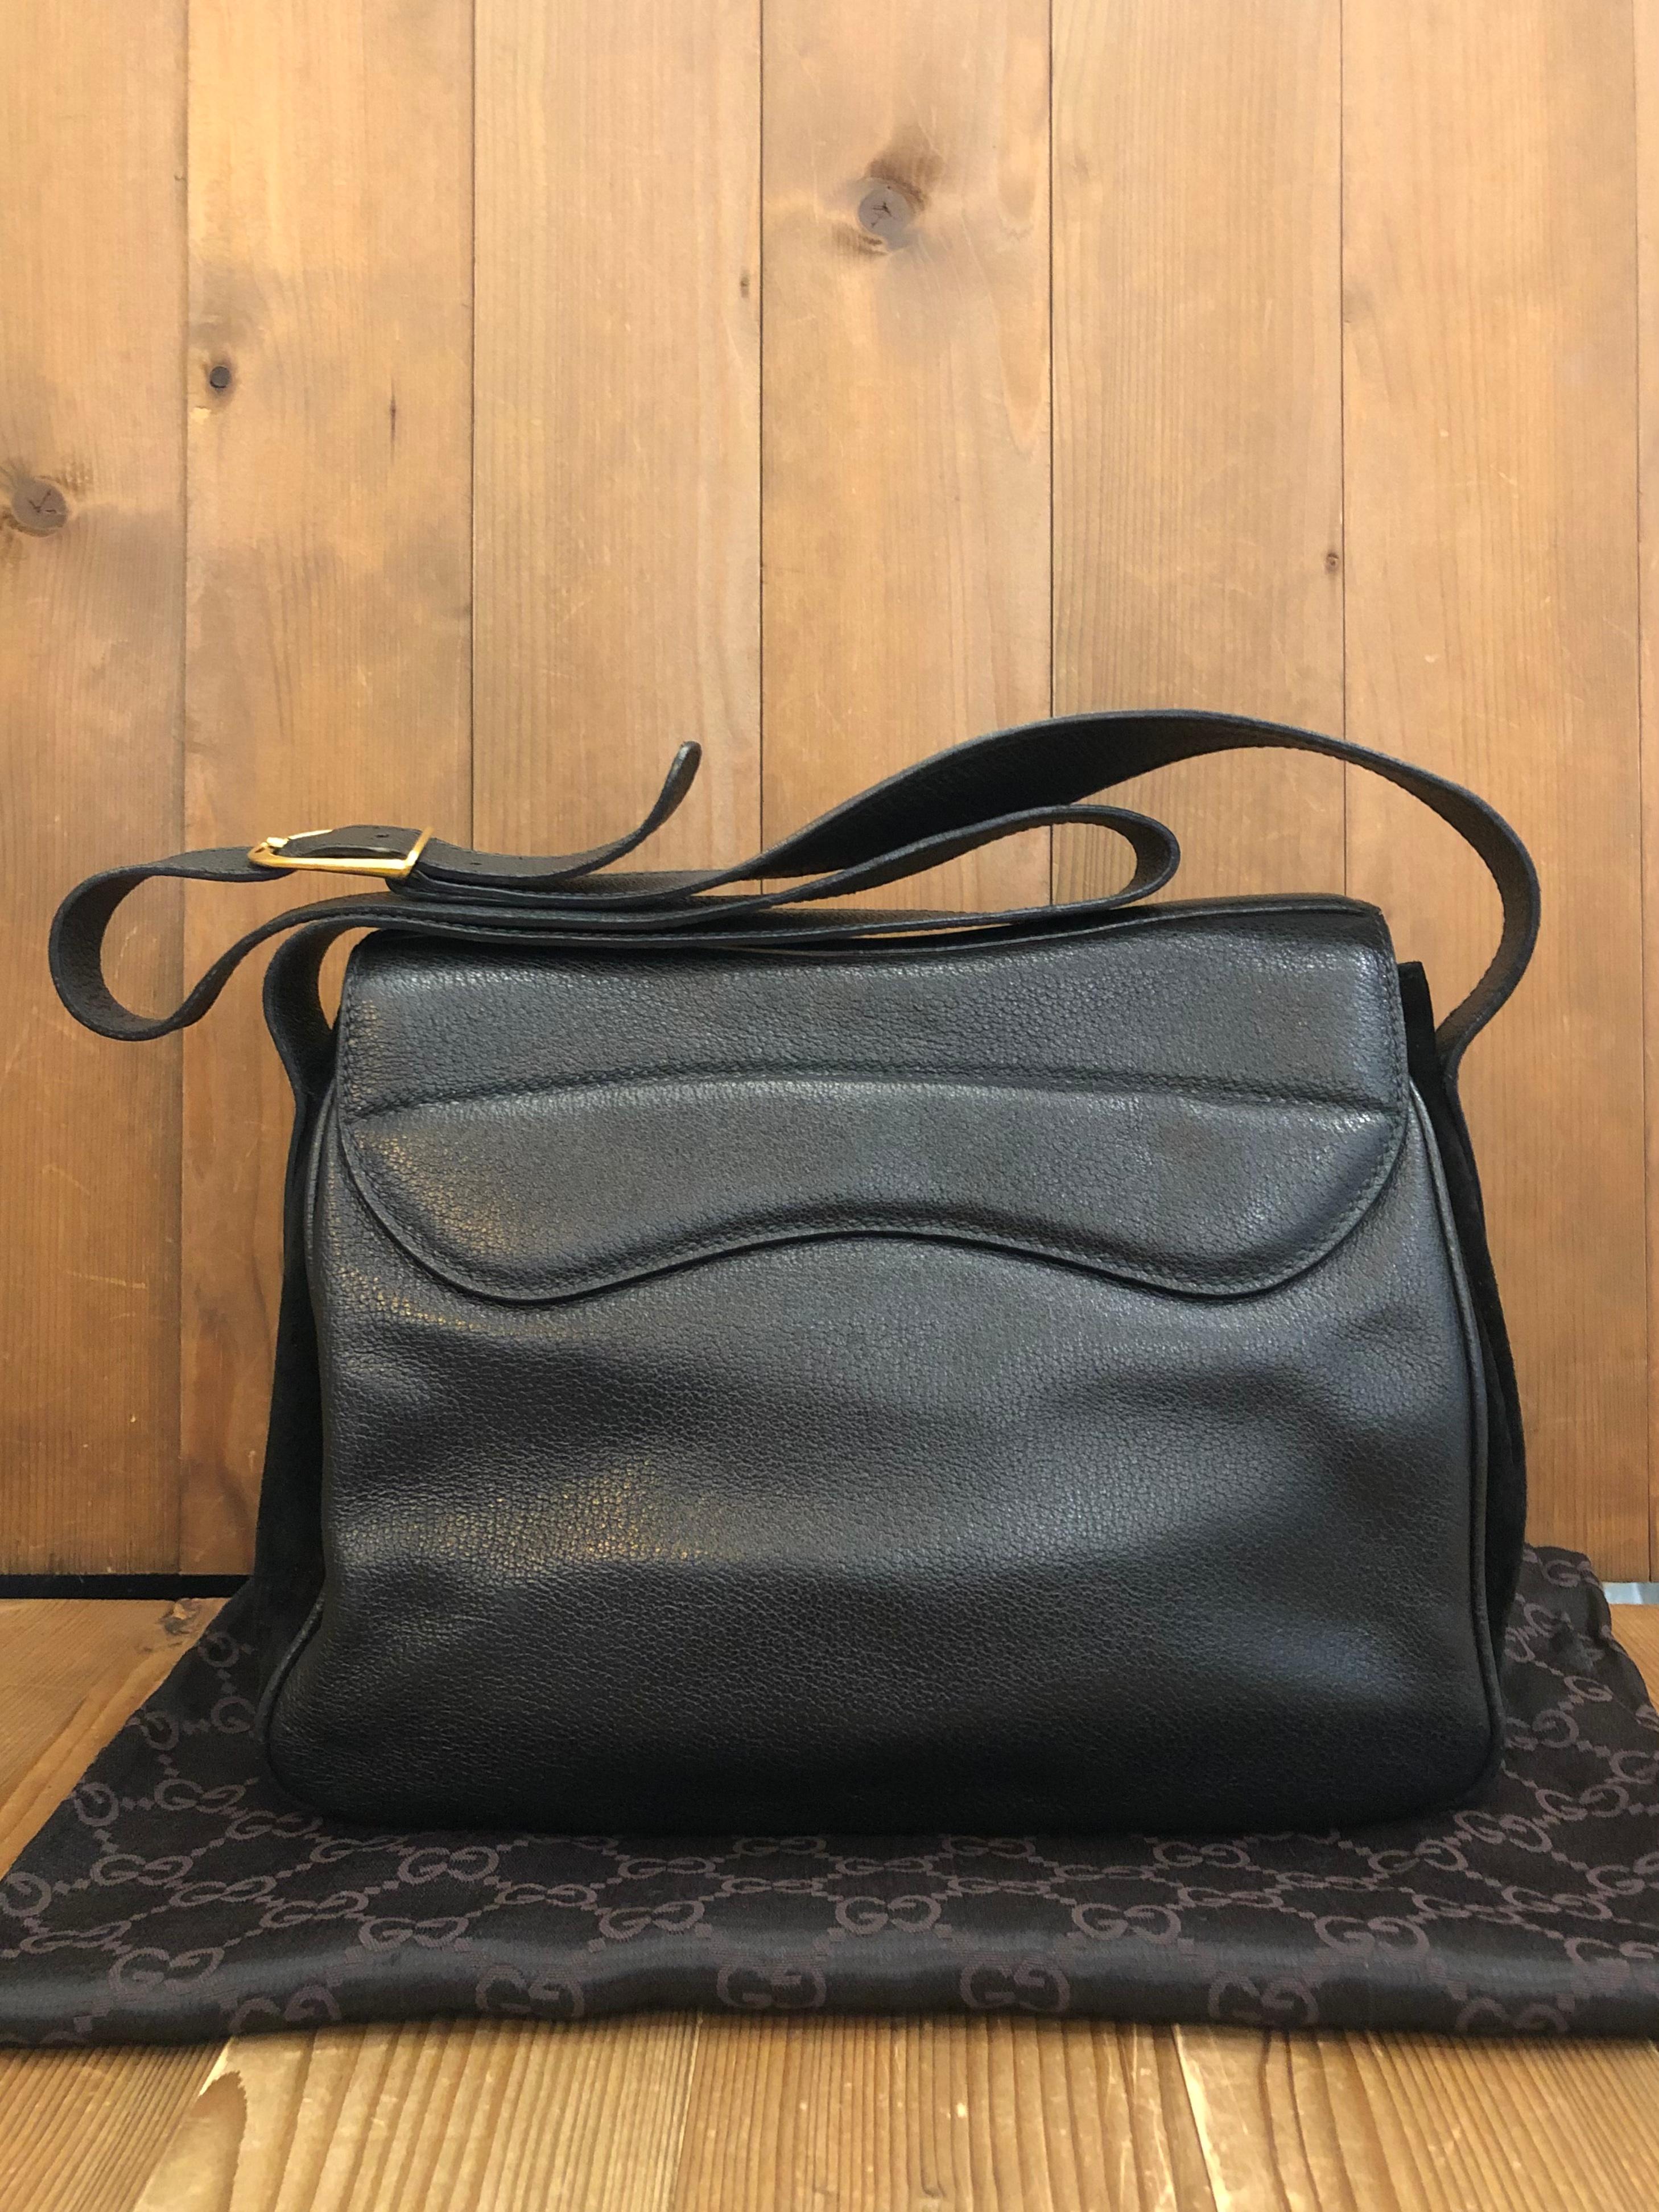 This vintage GUCCI saddle camera bag is crafted of pigskins and nubuck leather in black featuring matte gold toned hardware. Front flap double magnetic snap closure opens to a black diamanté jacquard interior featuring three compartments with a